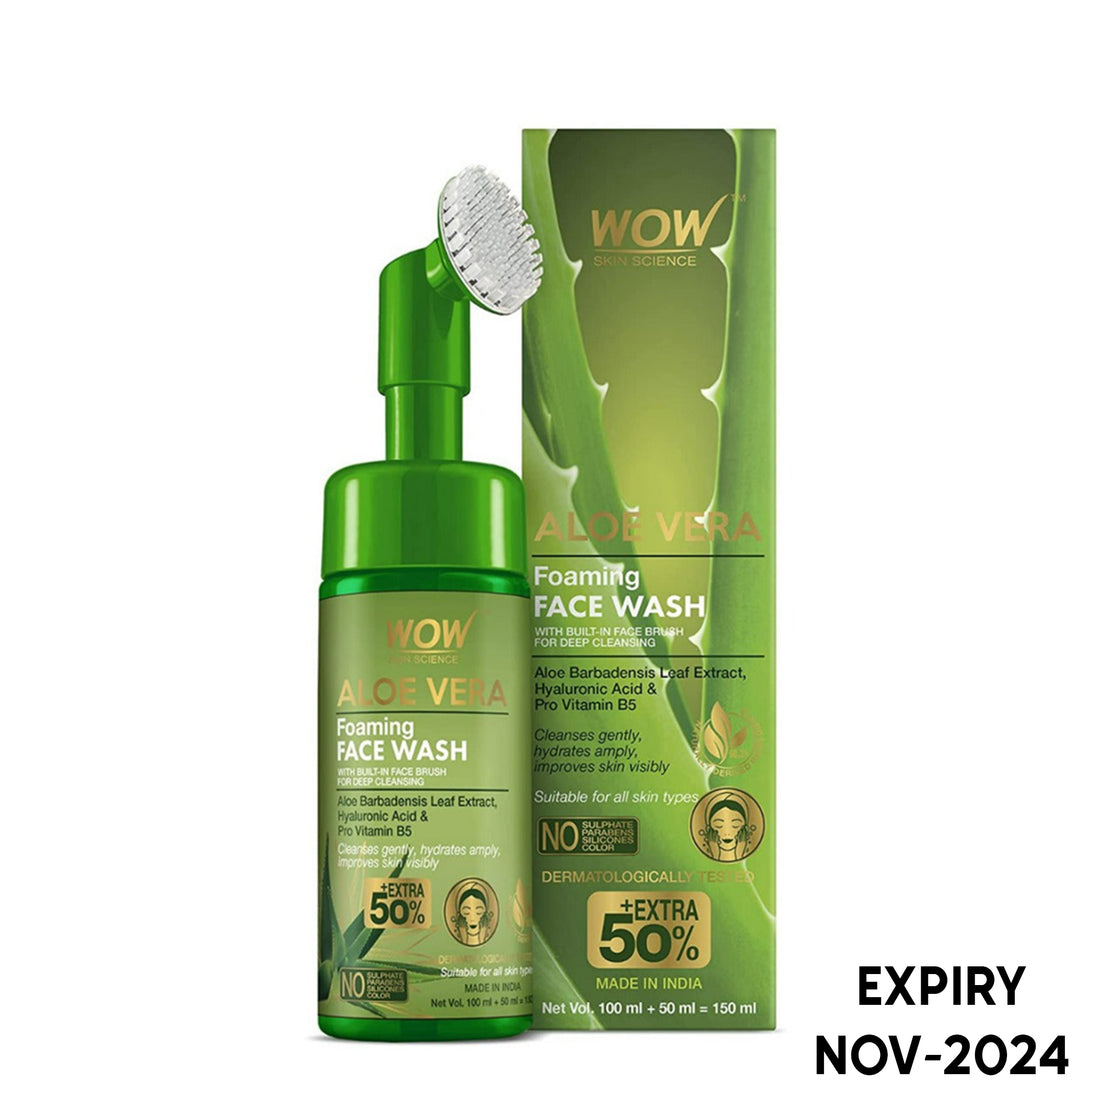 Wow Skin Science Aloe Vera Face Wash with Brush (150ml)